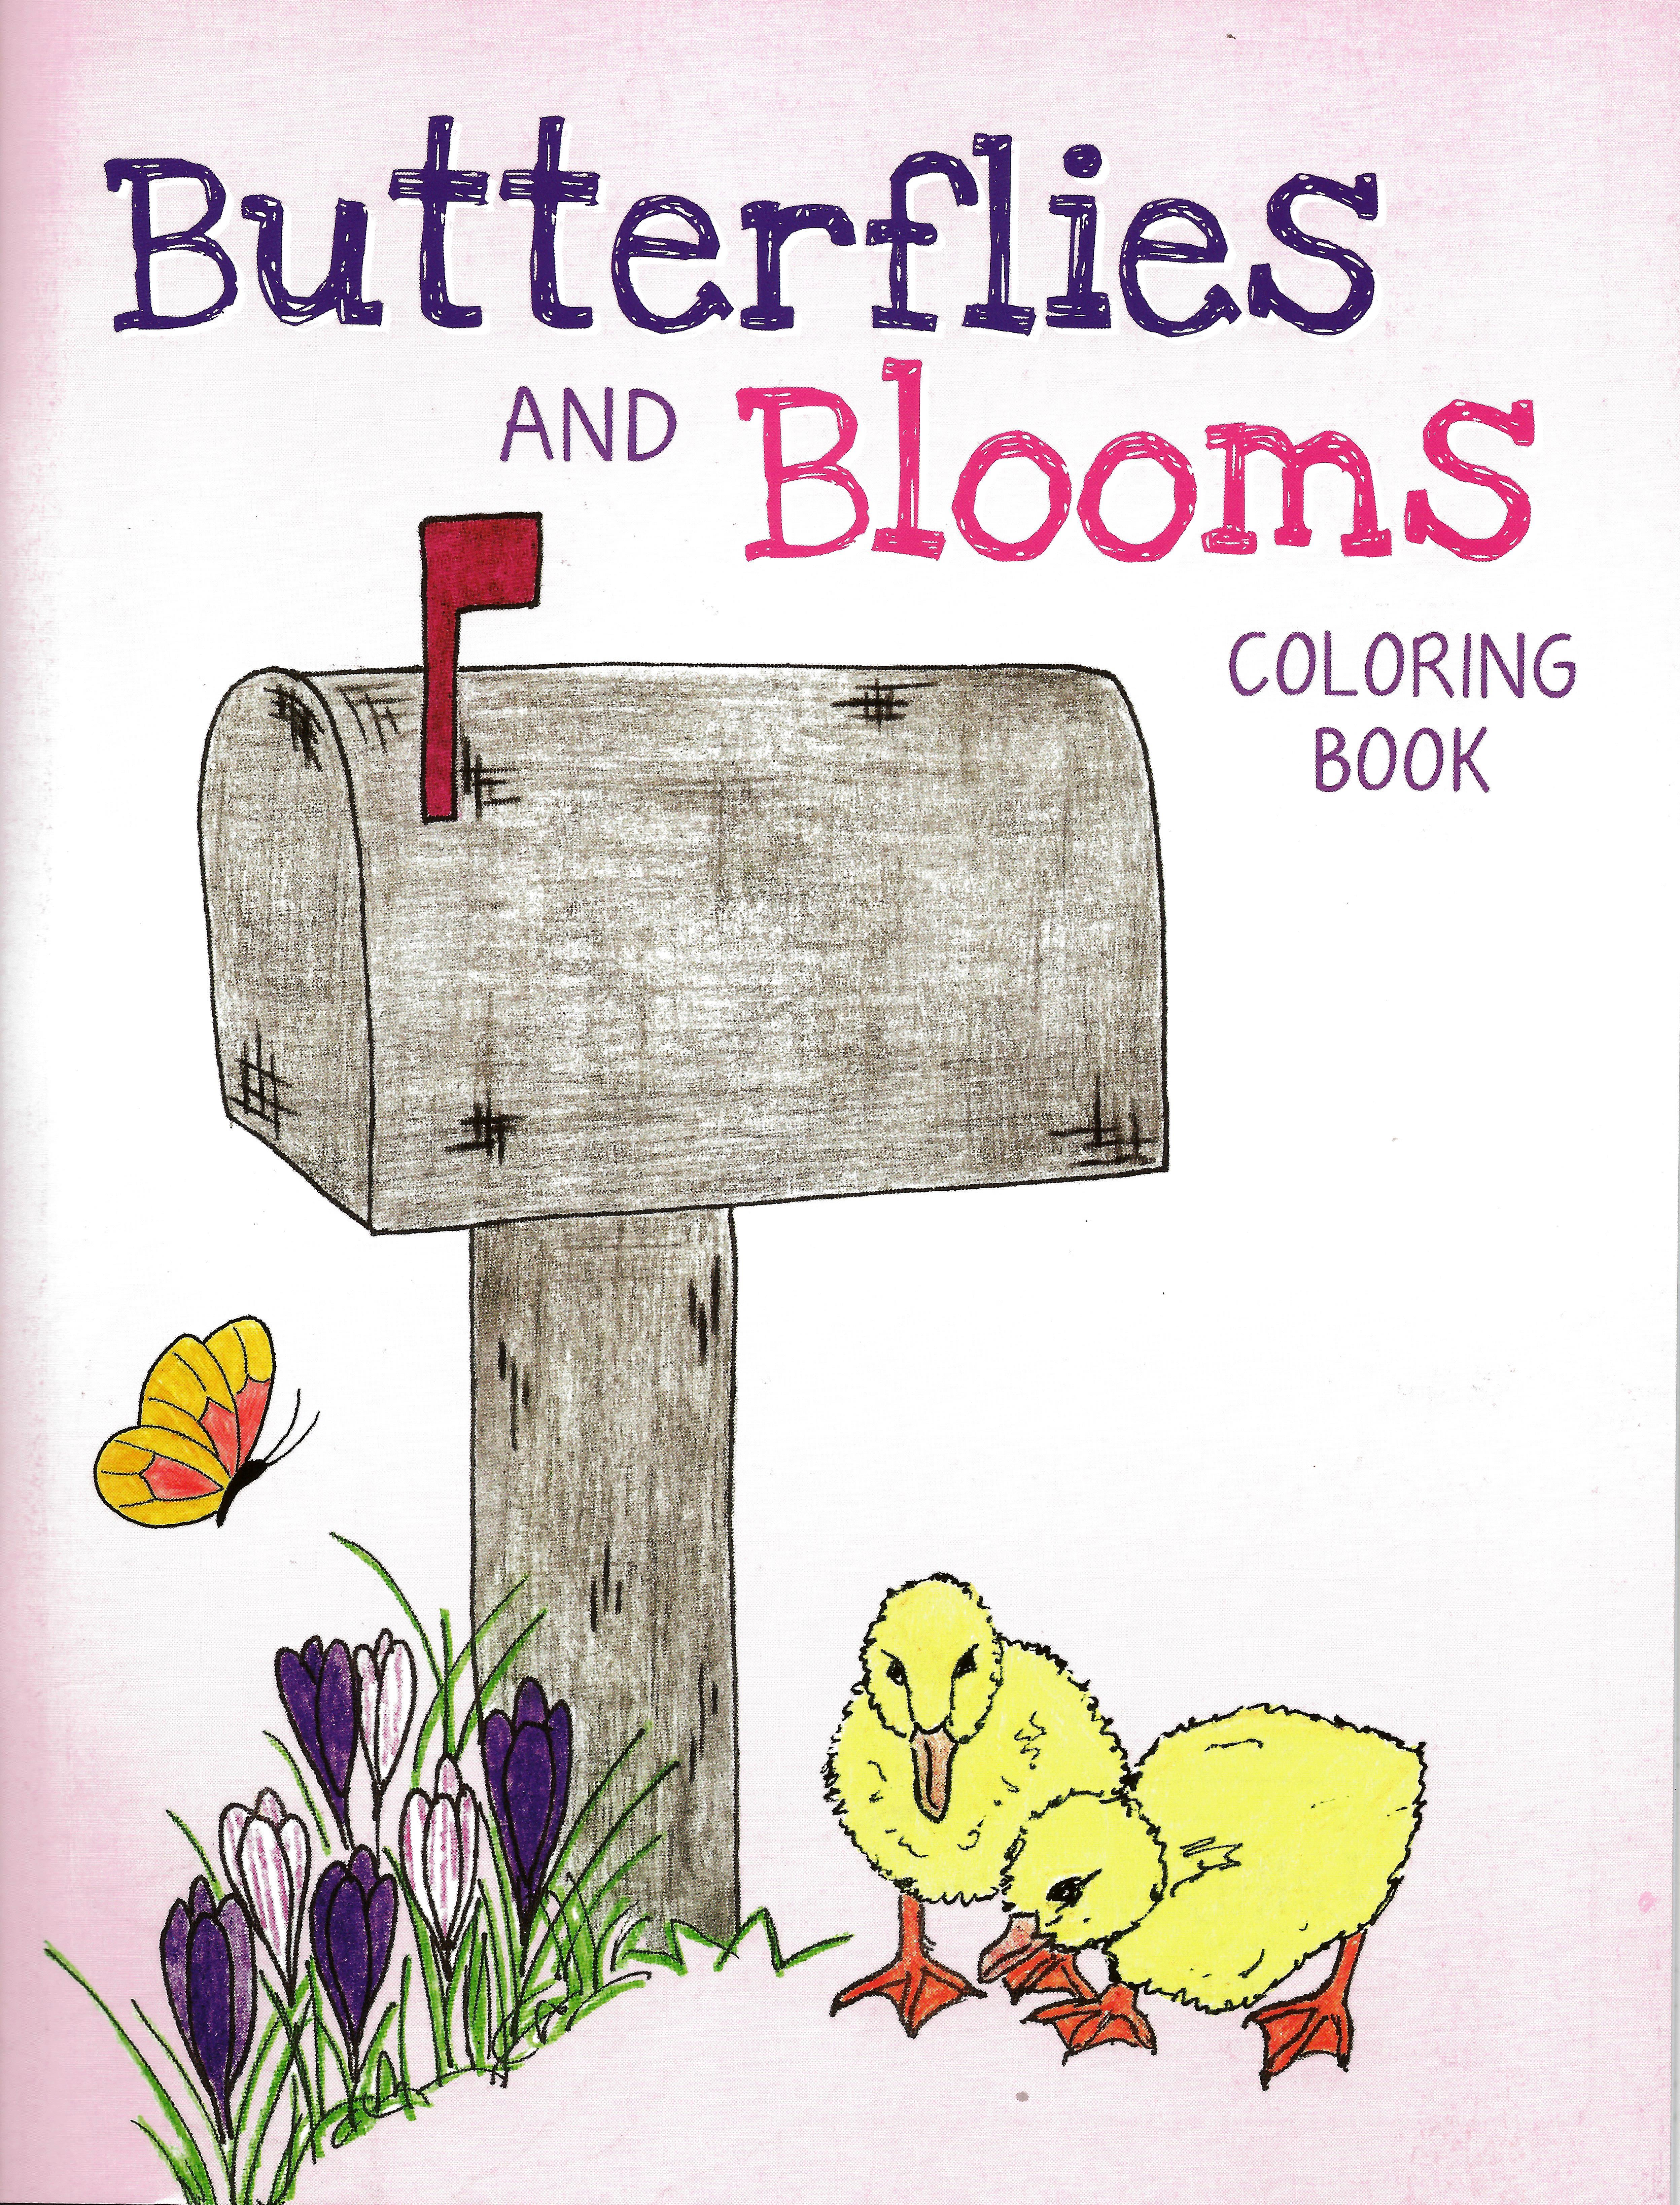 BUTTERFLIES AND BLOOMS COLORING BOOK